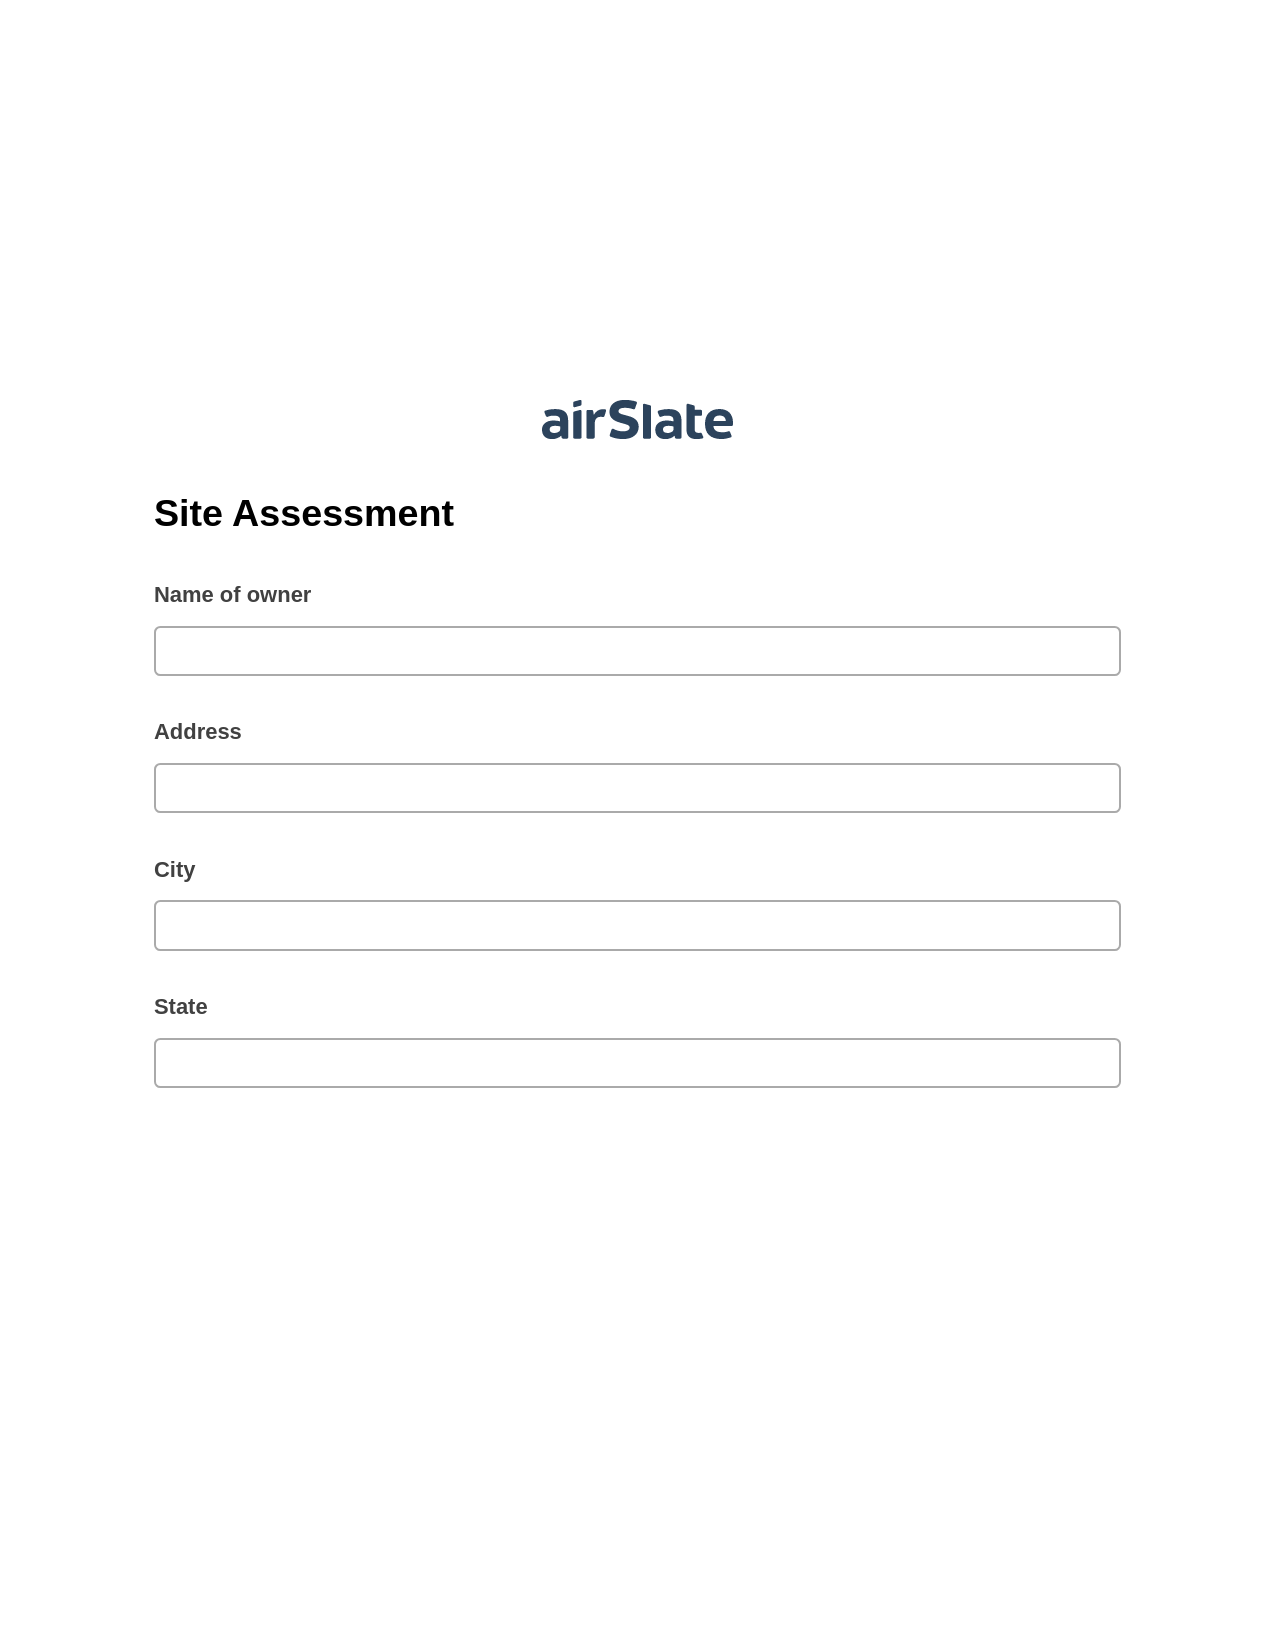 Site Assessment Pre-fill from Google Sheet Dropdown Options Bot, In-person Signing Bot, Email Notification Postfinish Bot